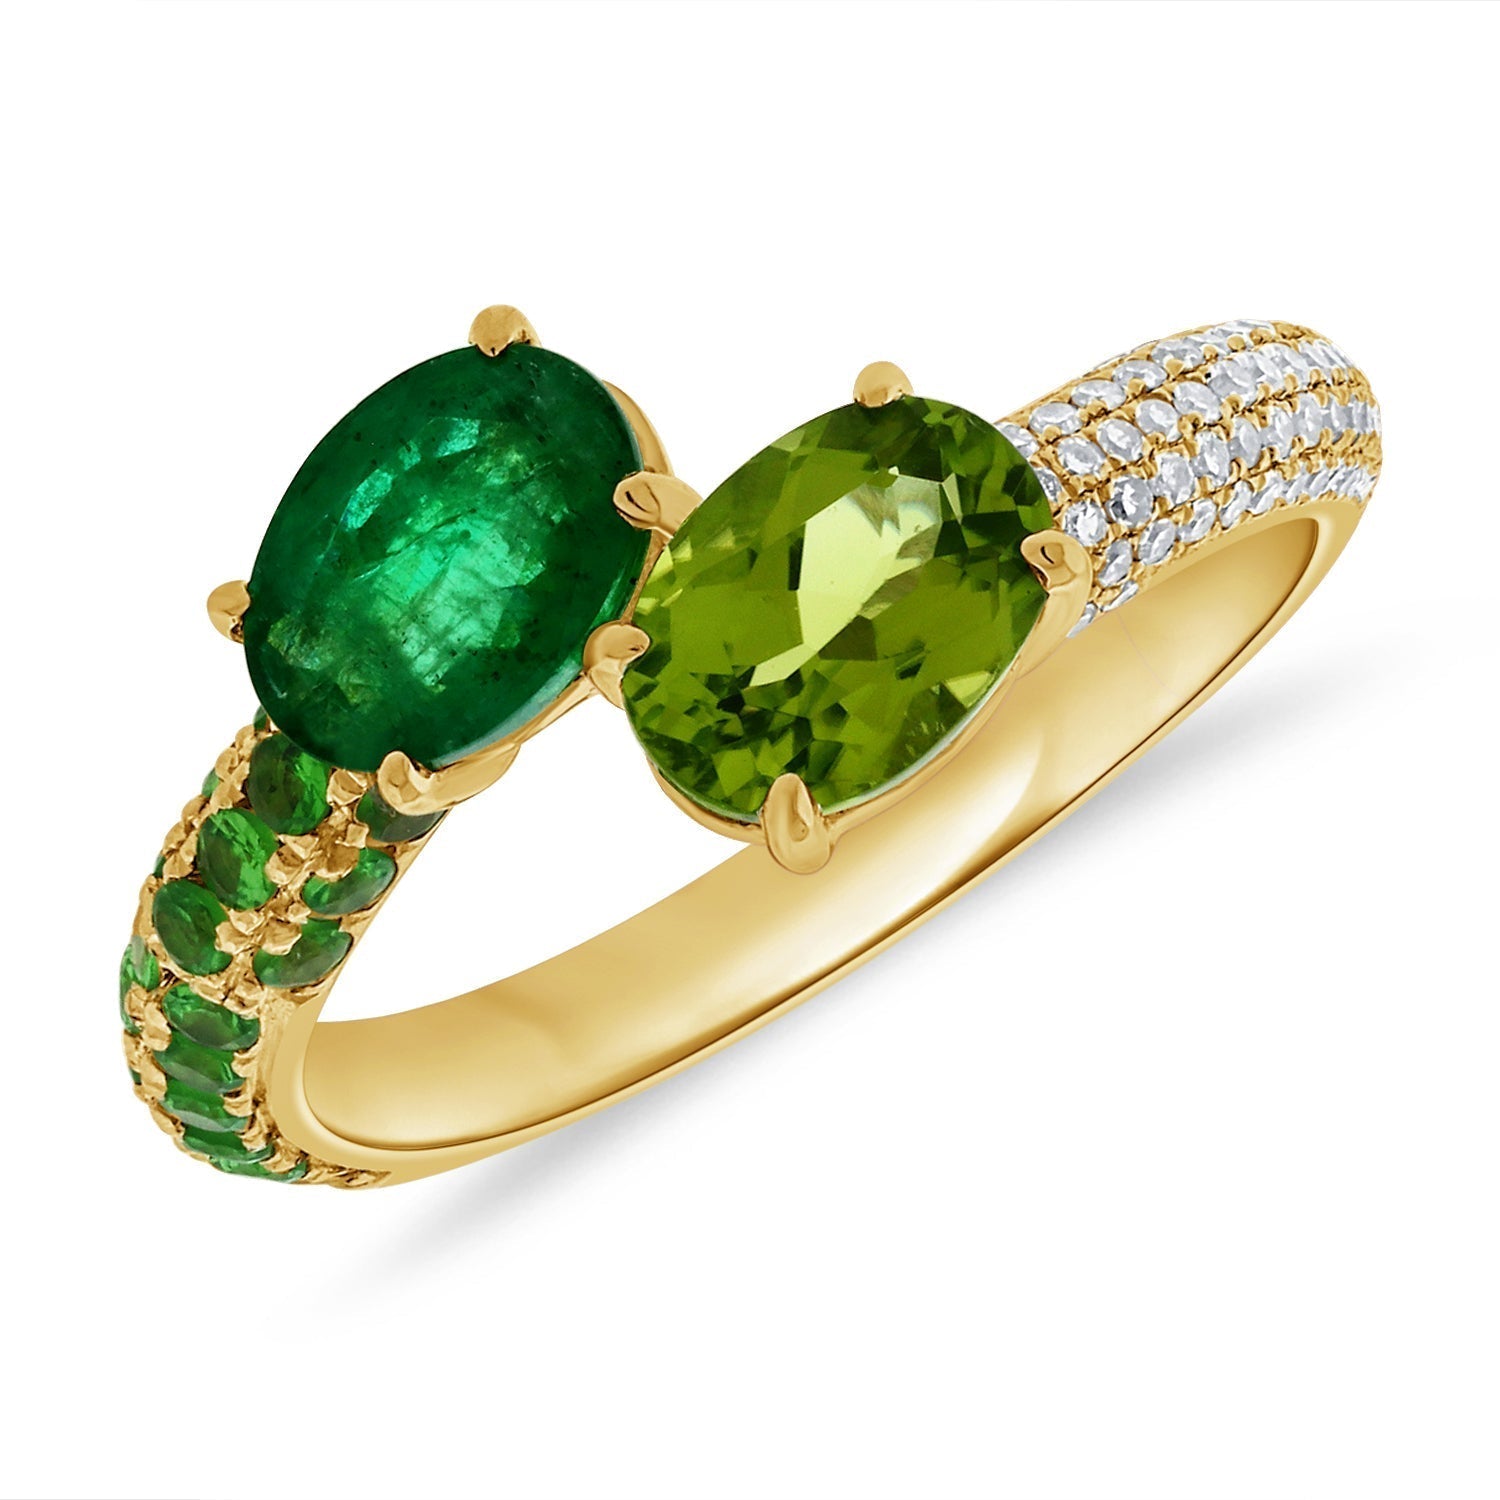 Spinning Peridot Ring | Discovered